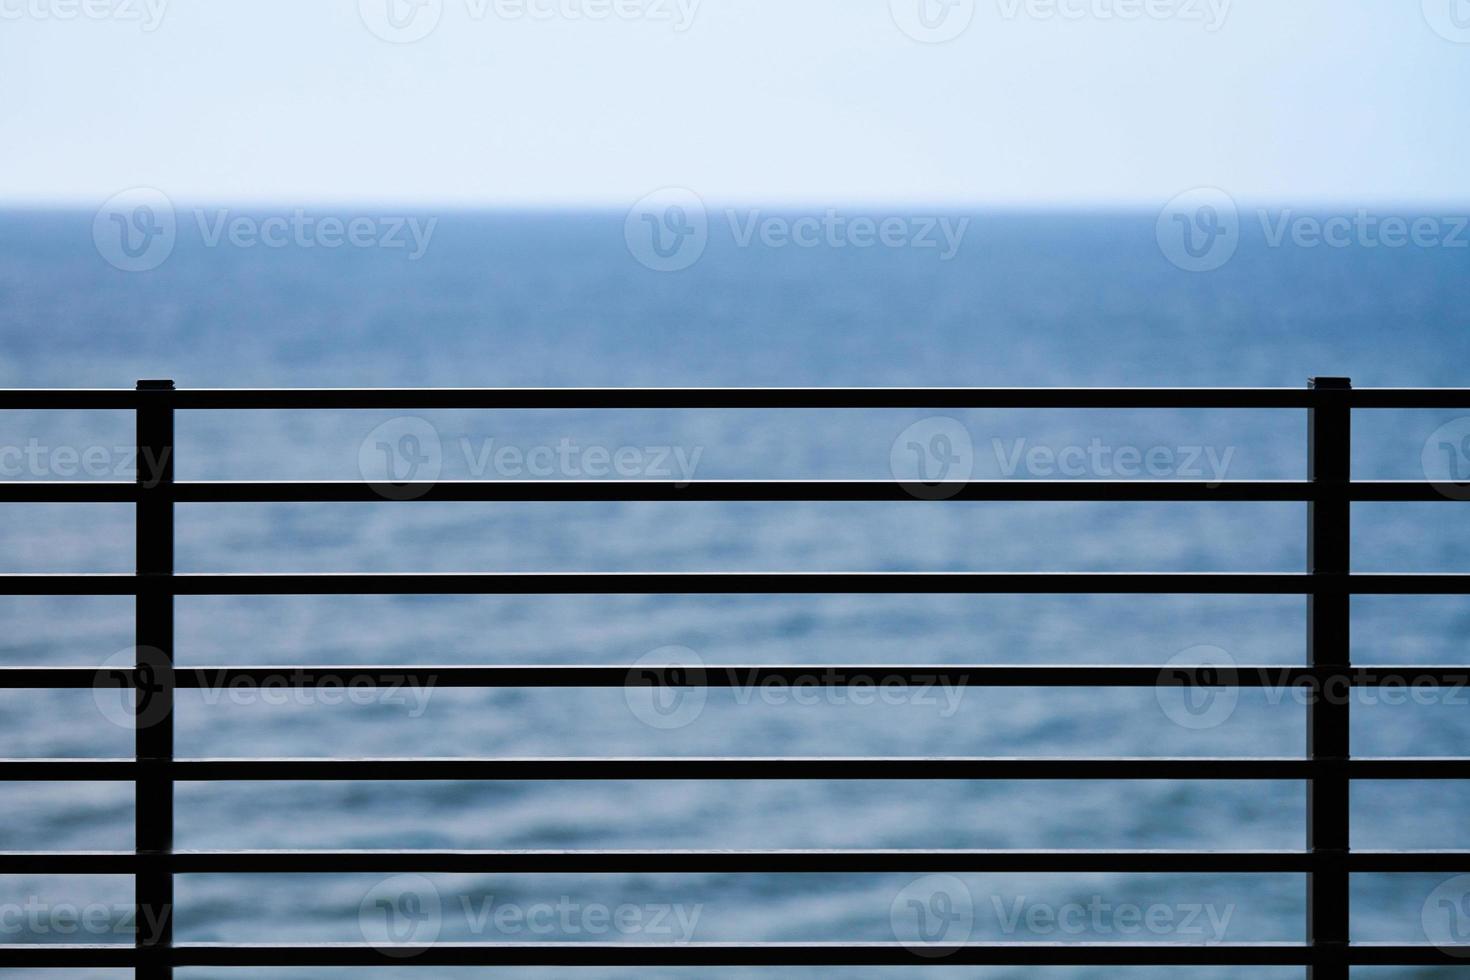 Fencing on observation deck, blue sea background, protection of tourists from falling off cliff photo